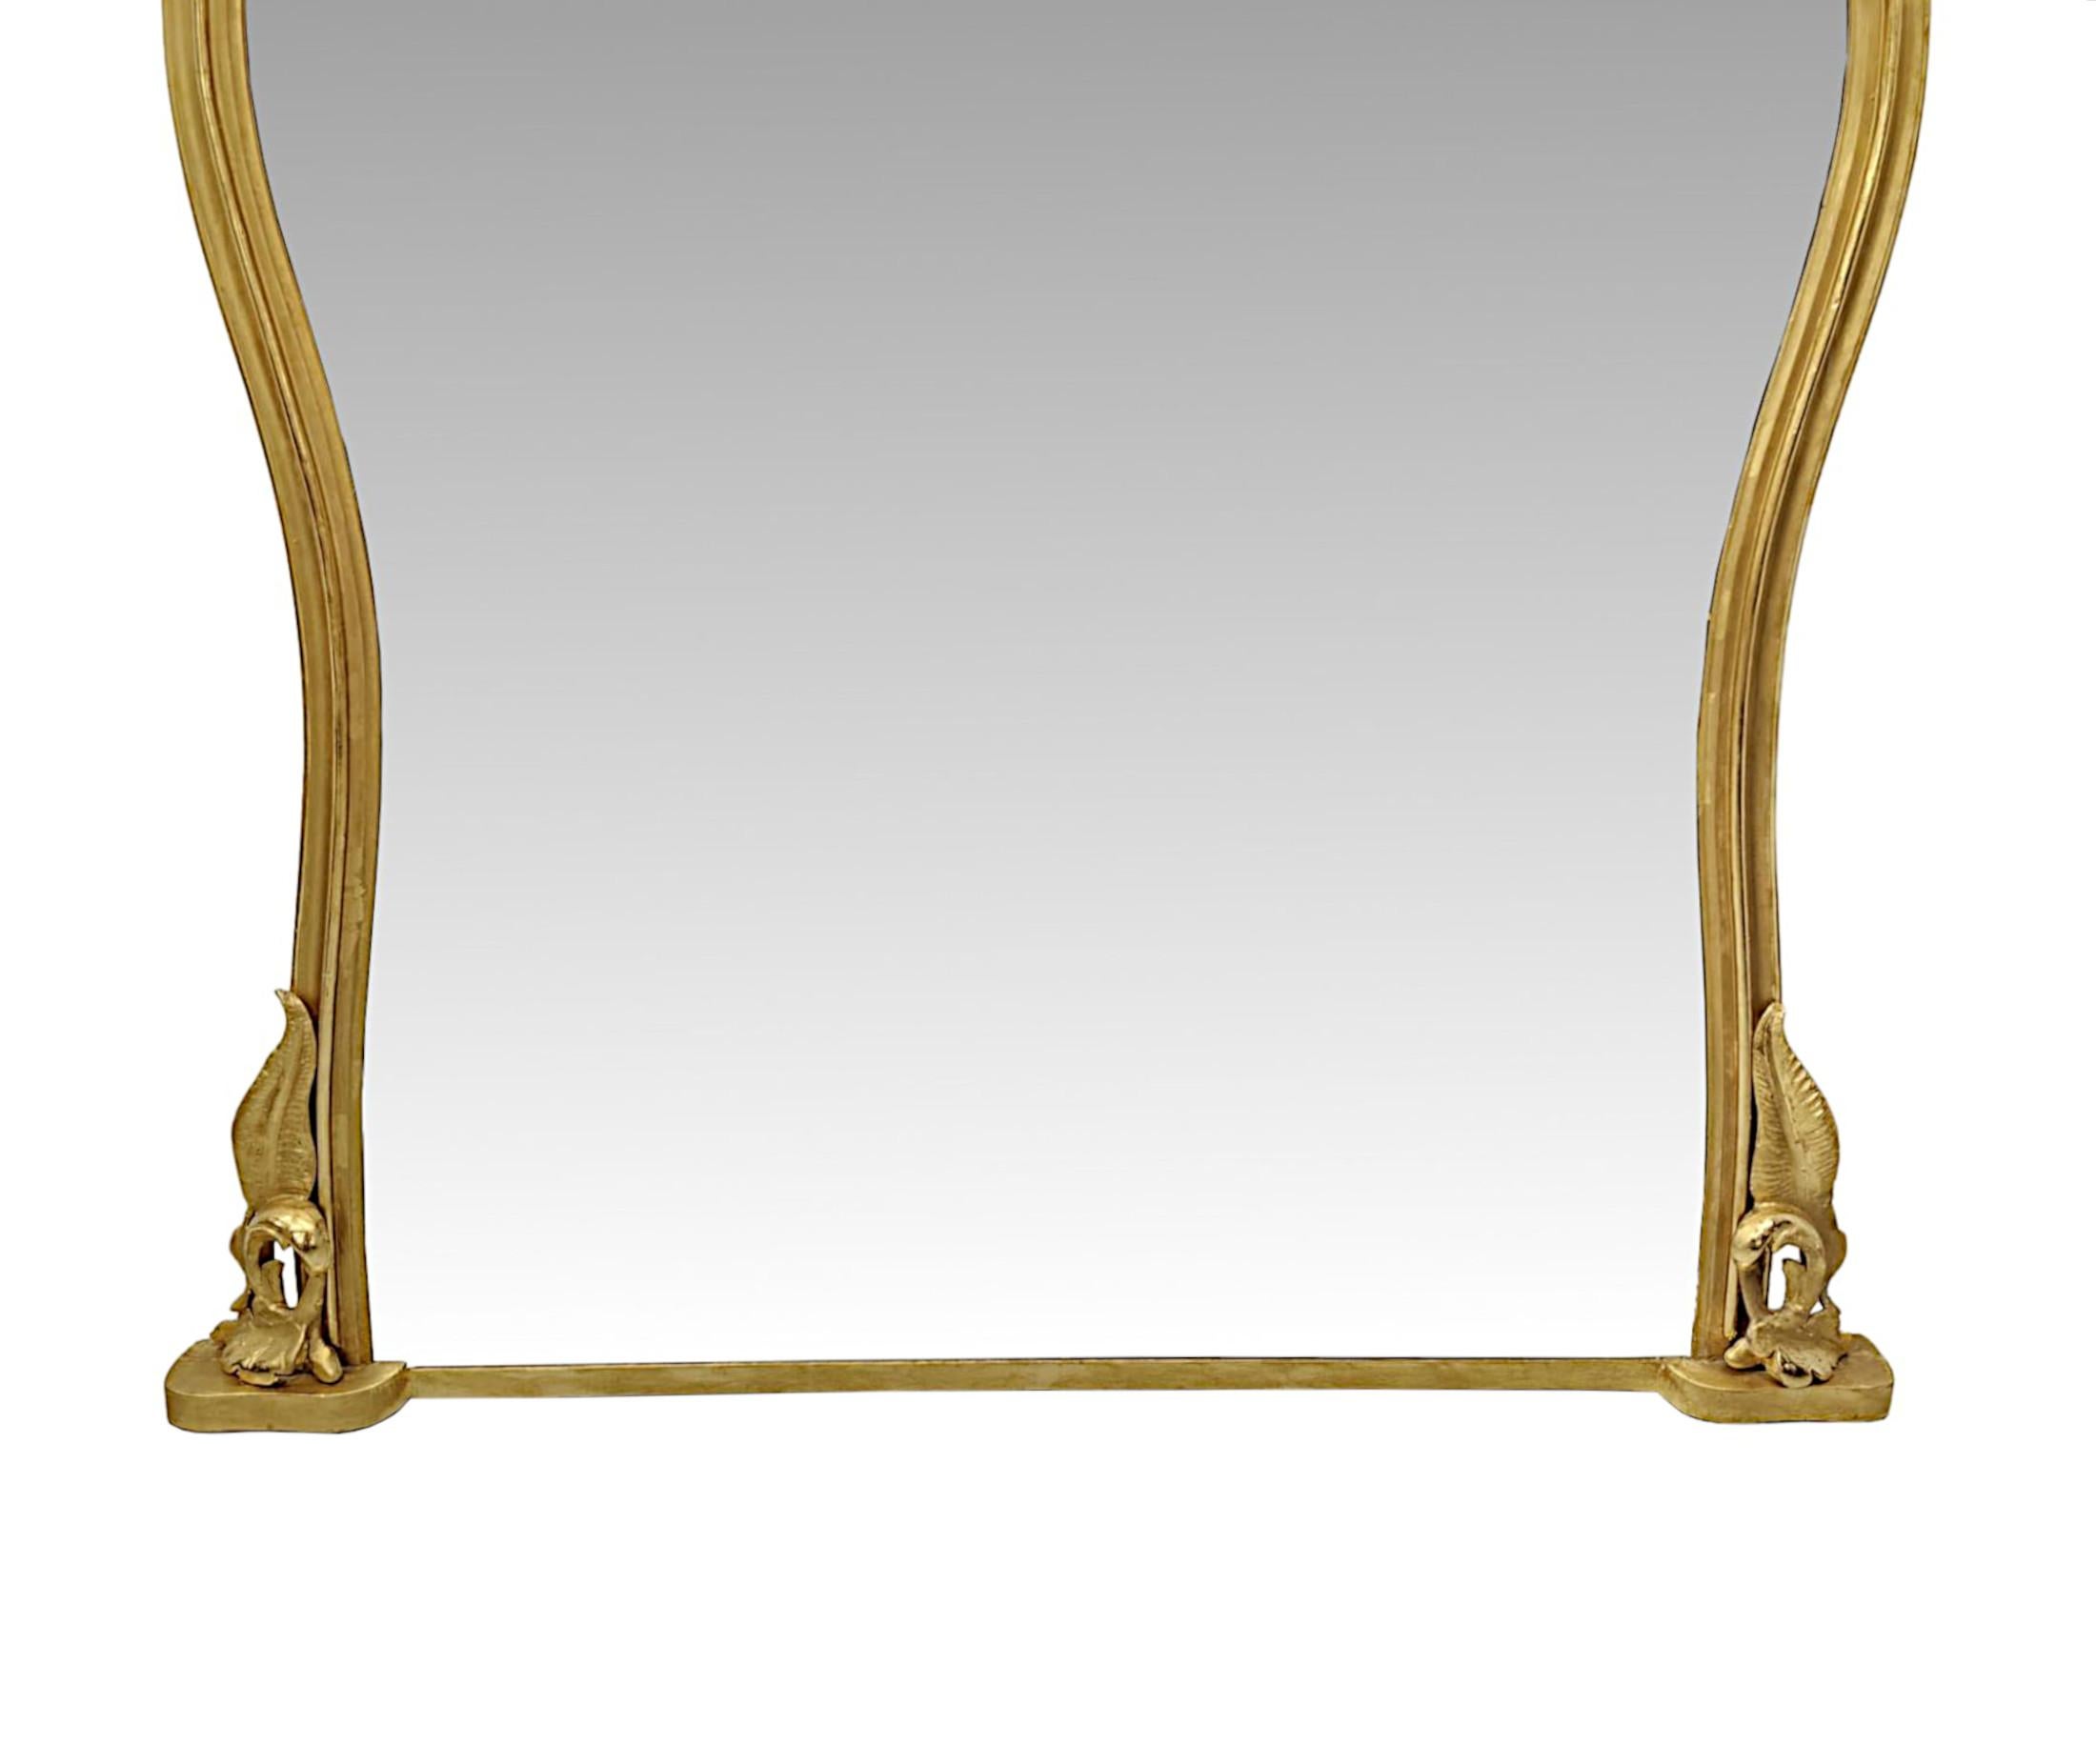  A Very Fine Large 19th Century Waisted Archtop Giltwood Overmantel Mirror In Good Condition For Sale In Dublin, IE